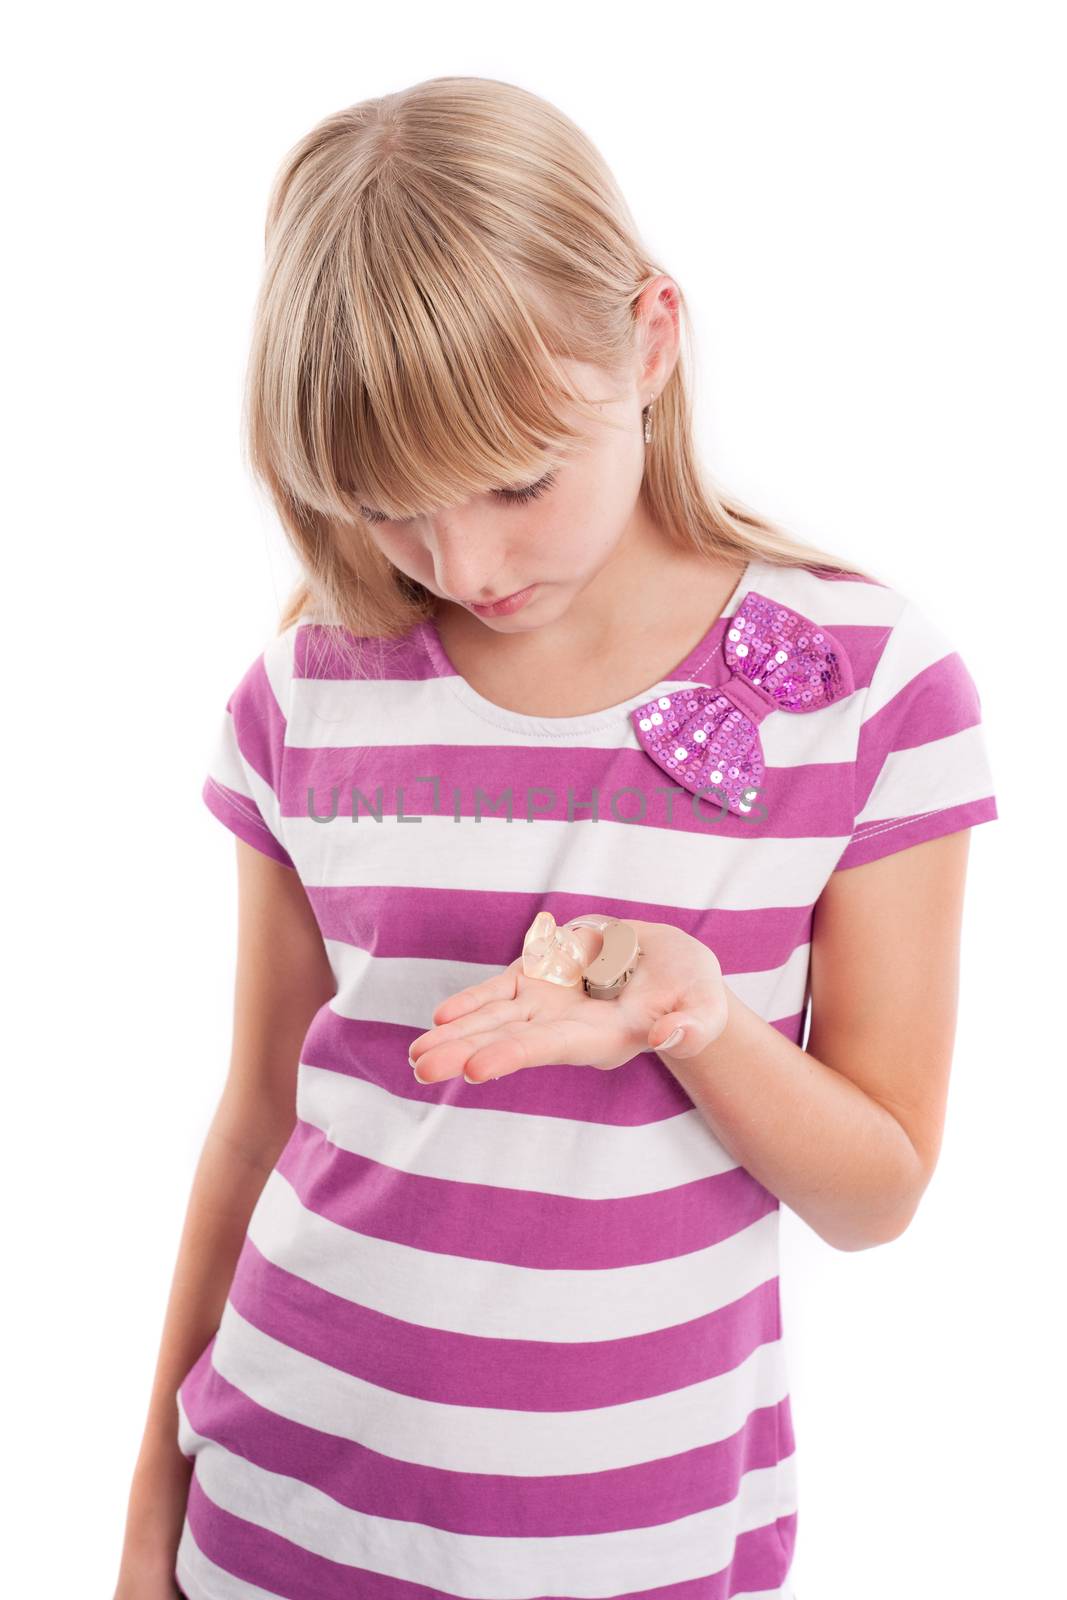 Young girl holding a digital behind-the-ear hearing aid with earmould and tubing on her palm. Isolated on white.